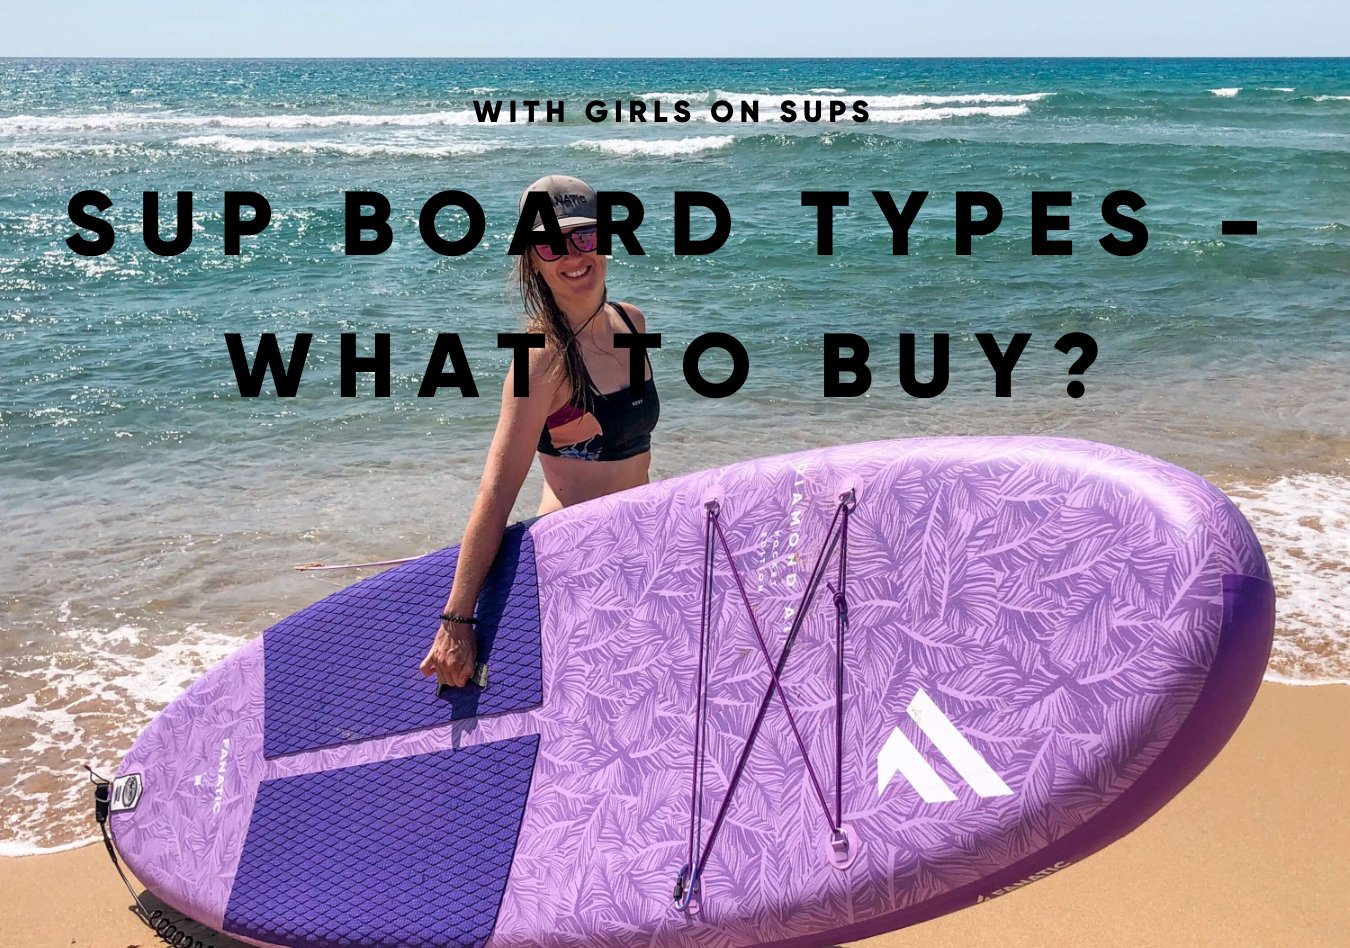 SUP BOARD TYPES - WHAT TO BUY? - Worthing Watersports